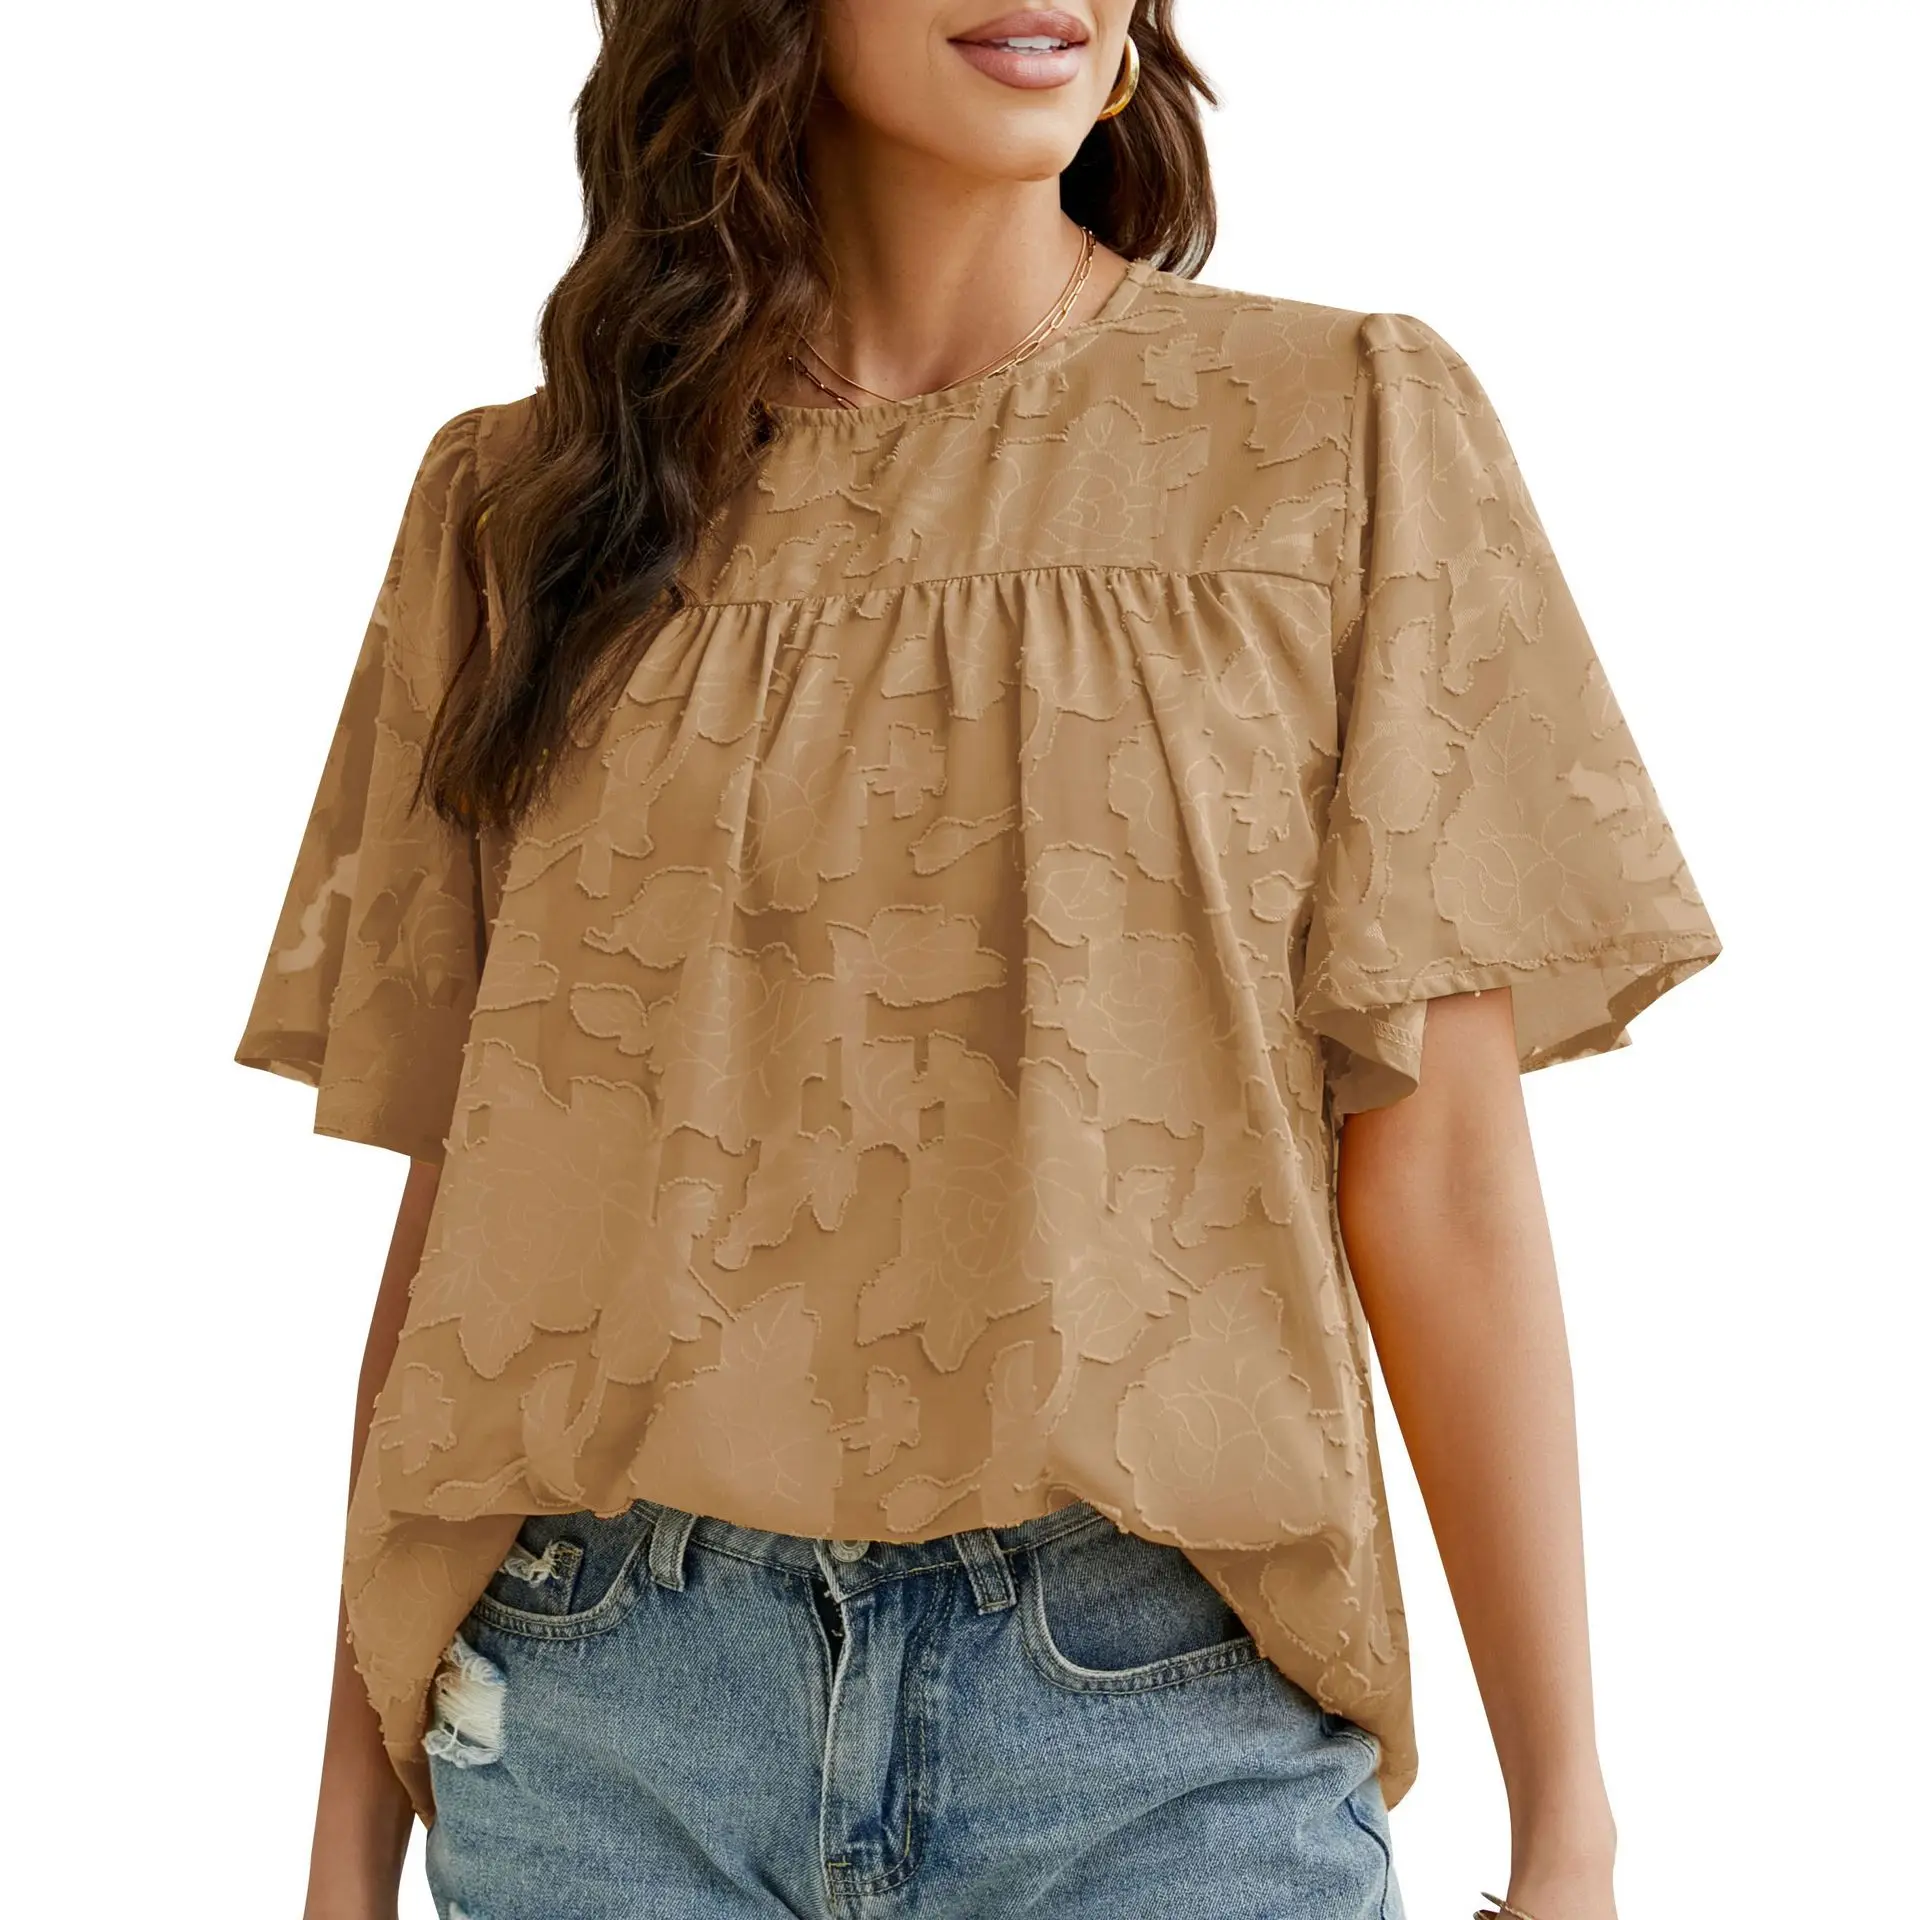 Women Loose Casual Shirts Clothing 2022 Vintage Flower Embroidery Blouse Flare Sleeve Chiffon Tops Ladies Elegant Tunic blusas